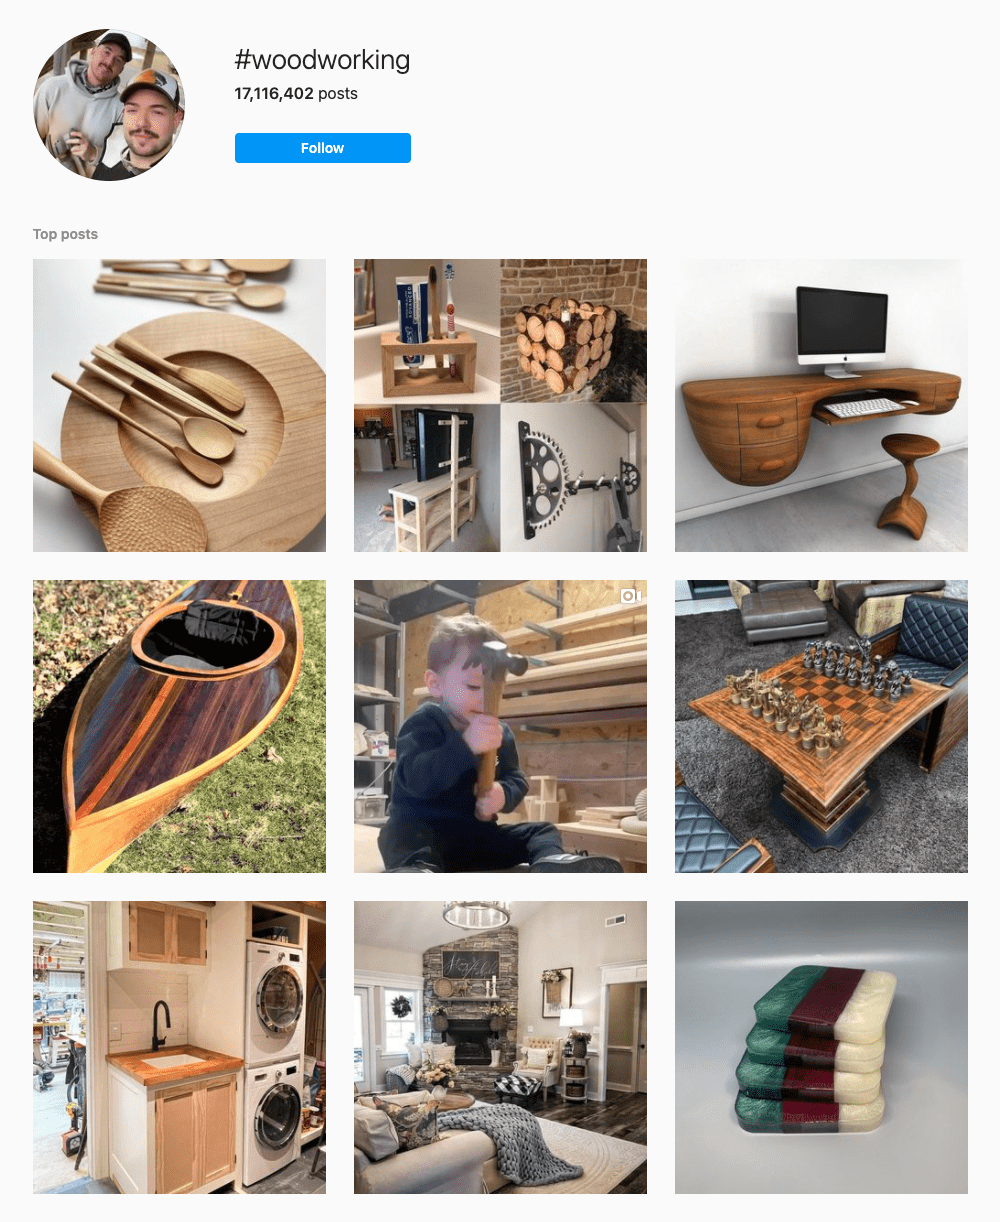 #woodworking Hashtags for Instagram